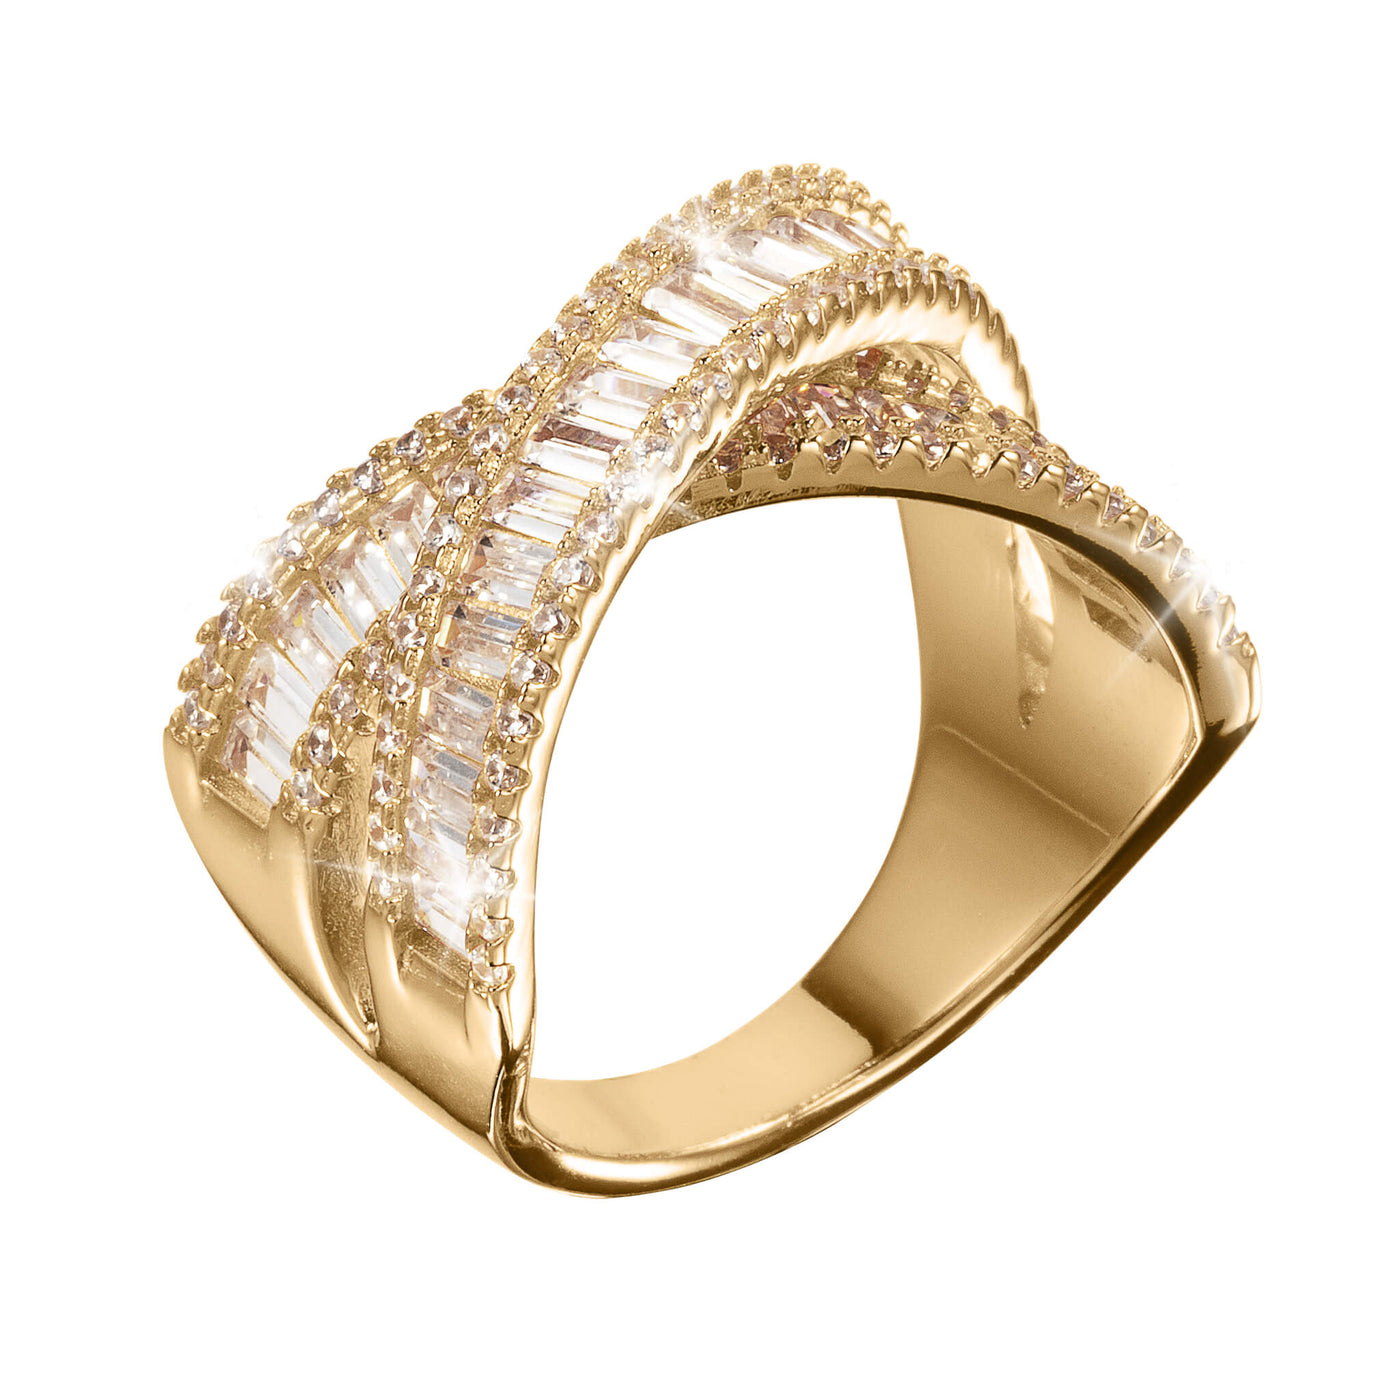 Daniel Steiger Labyrinth Luxe Ring